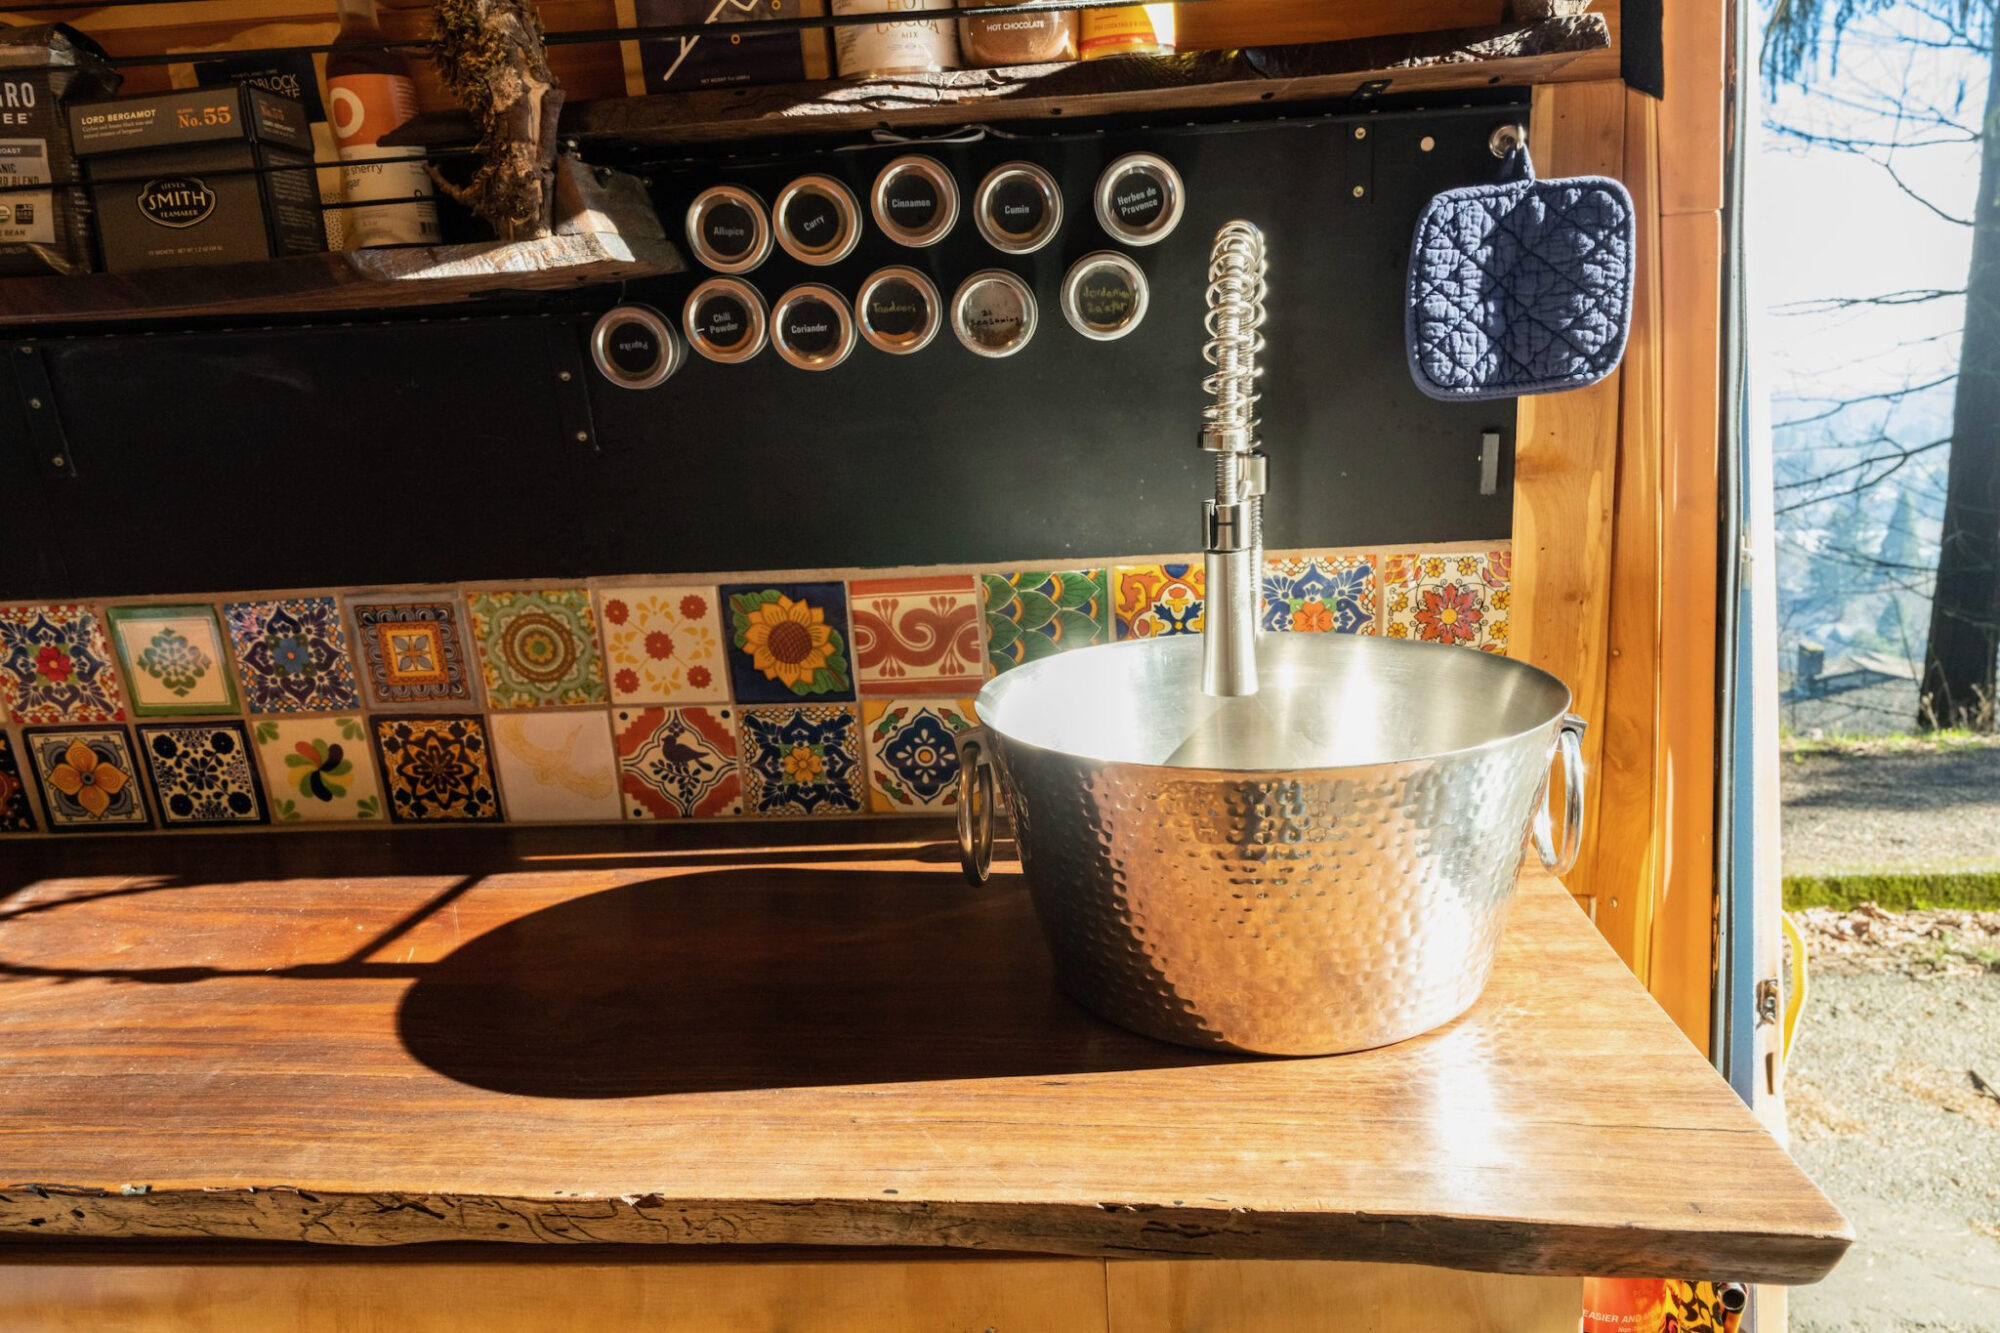 An eclectic kitchen corner featuring a hammered copper sink with a high-arc faucet, set against a backdrop of vibrant, multicolored Spanish tiles. The countertop is a slab of live-edge walnut, its natural edges and deep wood grain illuminated by the streaming sunlight from the open door. 